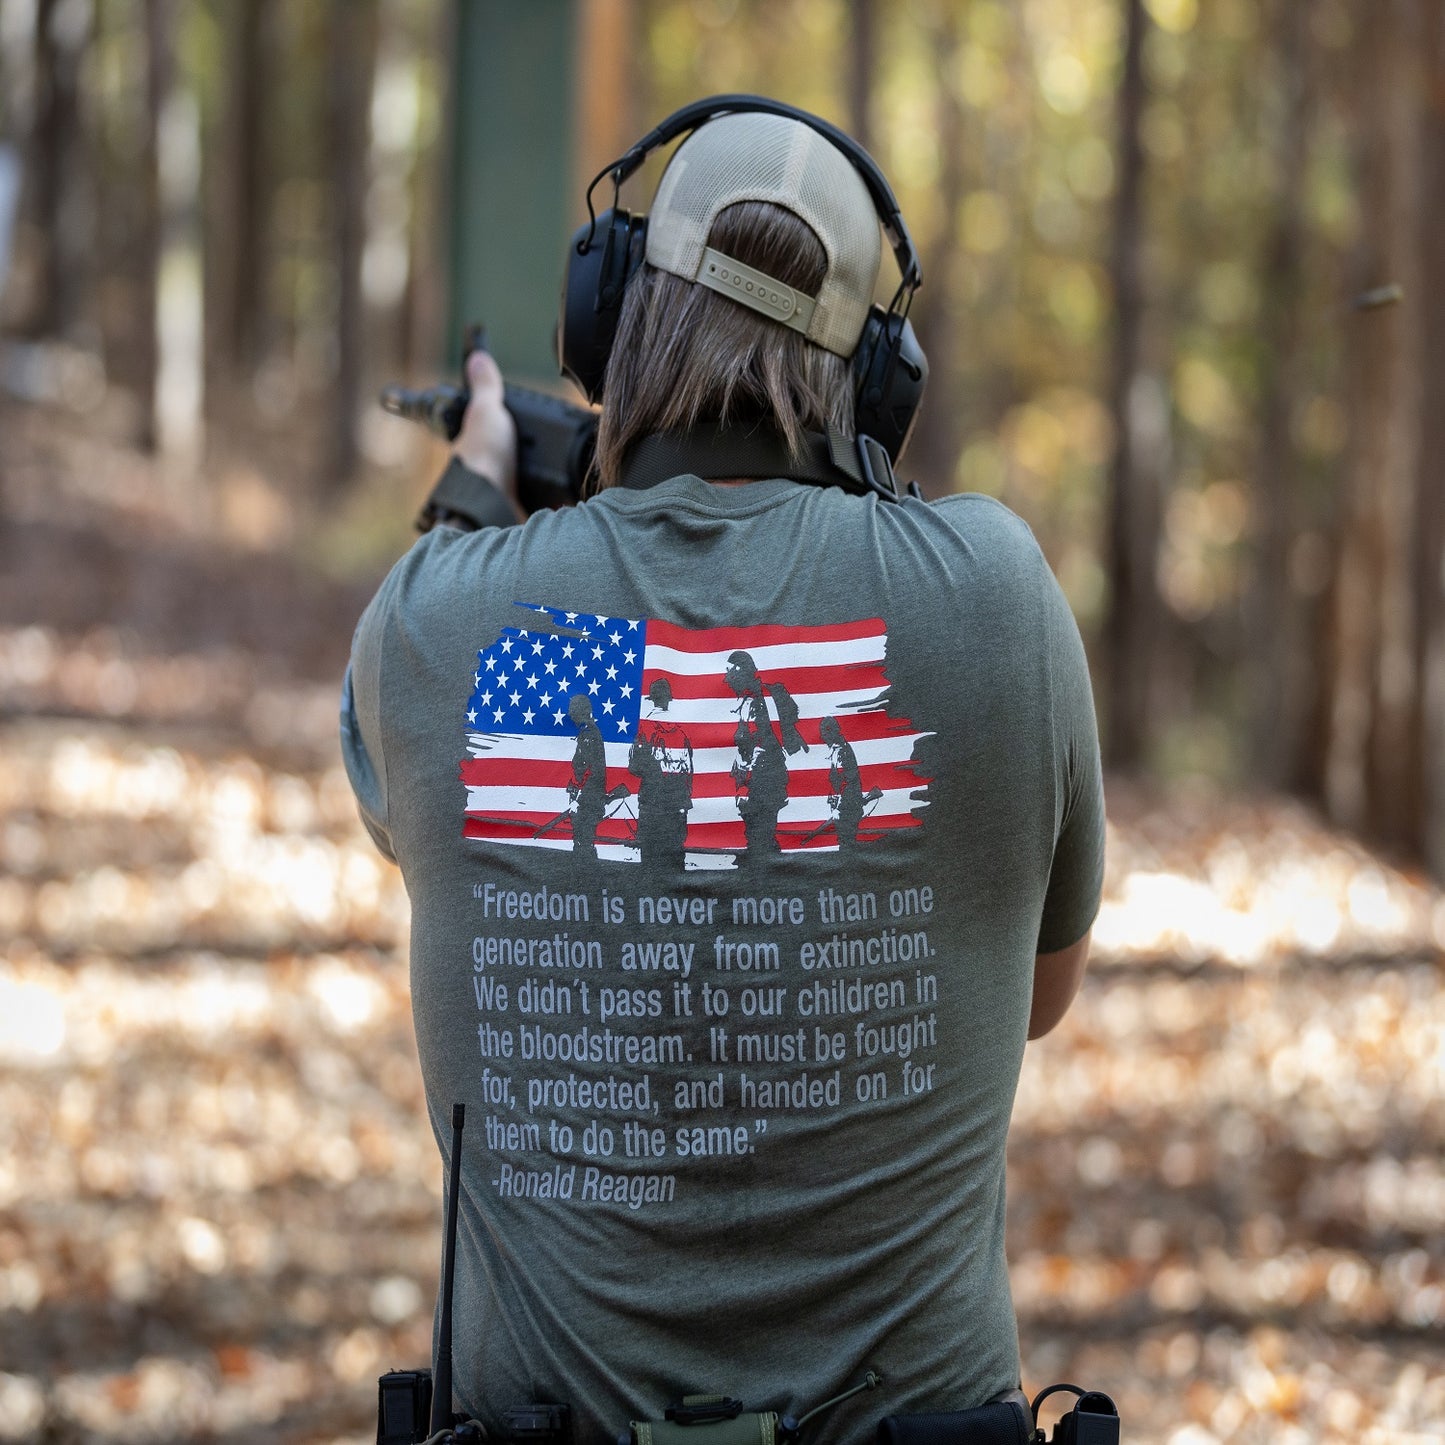 ´MERICA Authentic Military-Inspired T-Shirts by US Veterans - (Military Green)